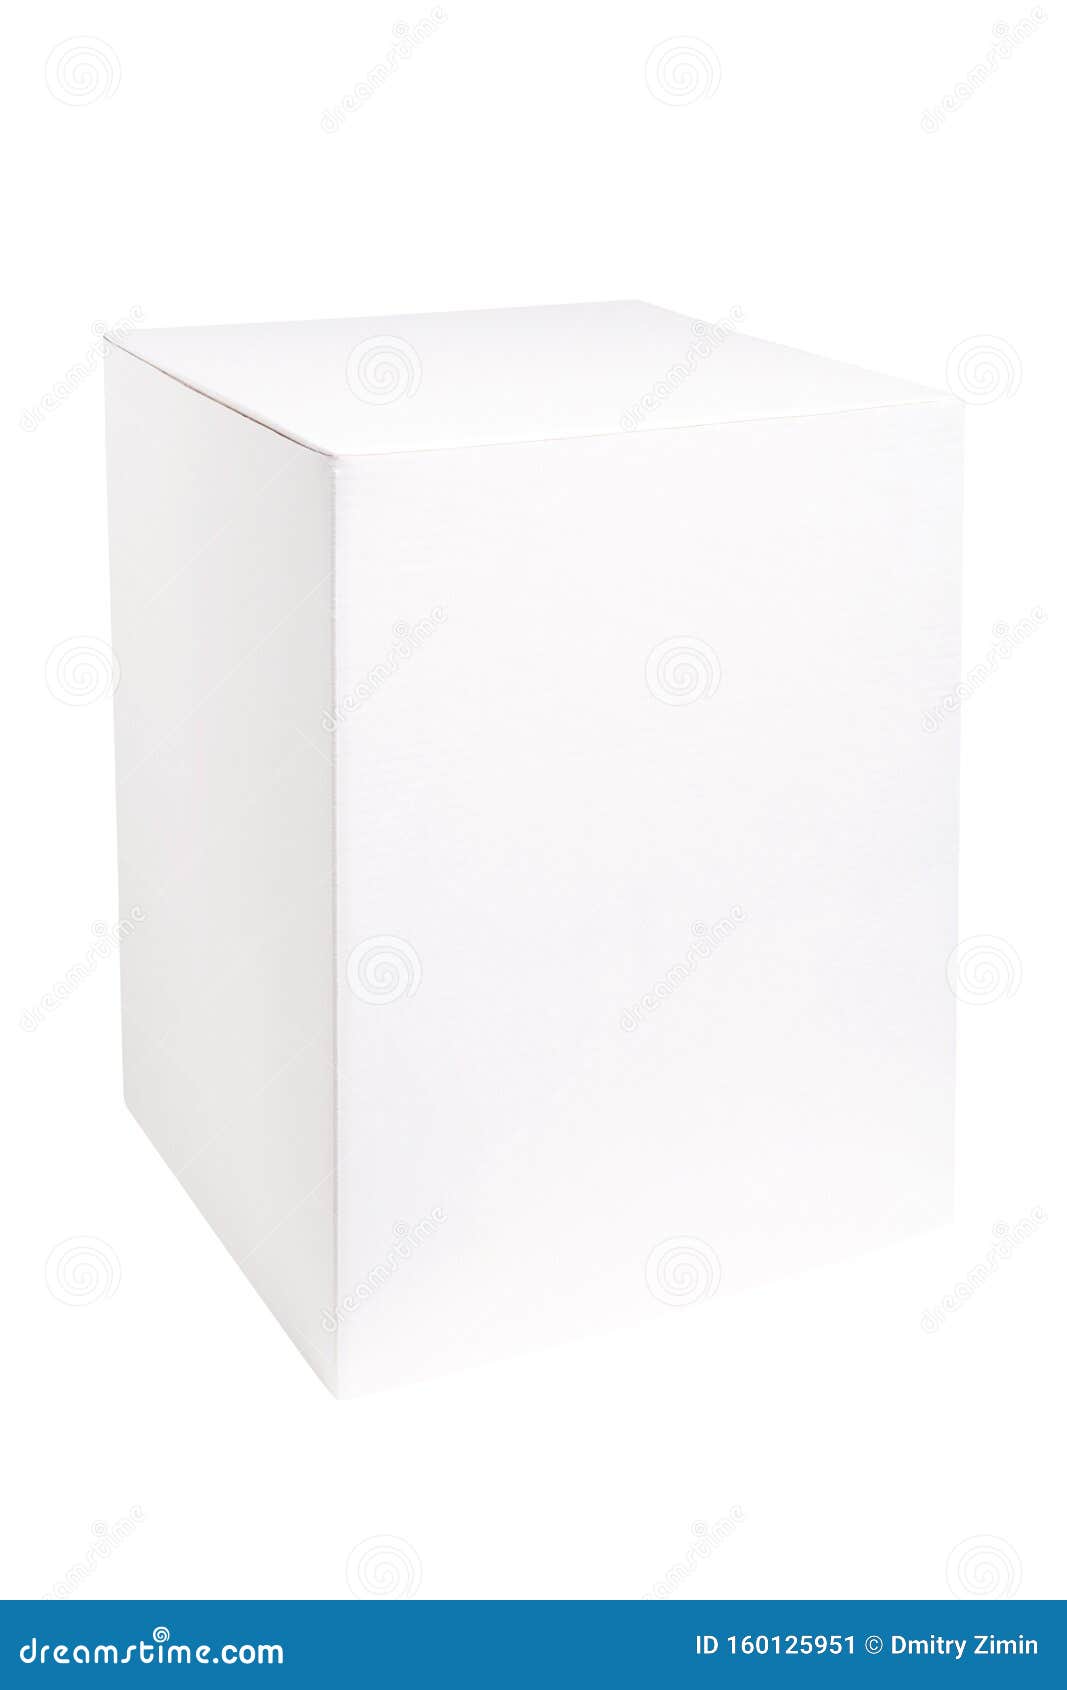 Download Blank White Vertical Box Mockup Isolated On White ...